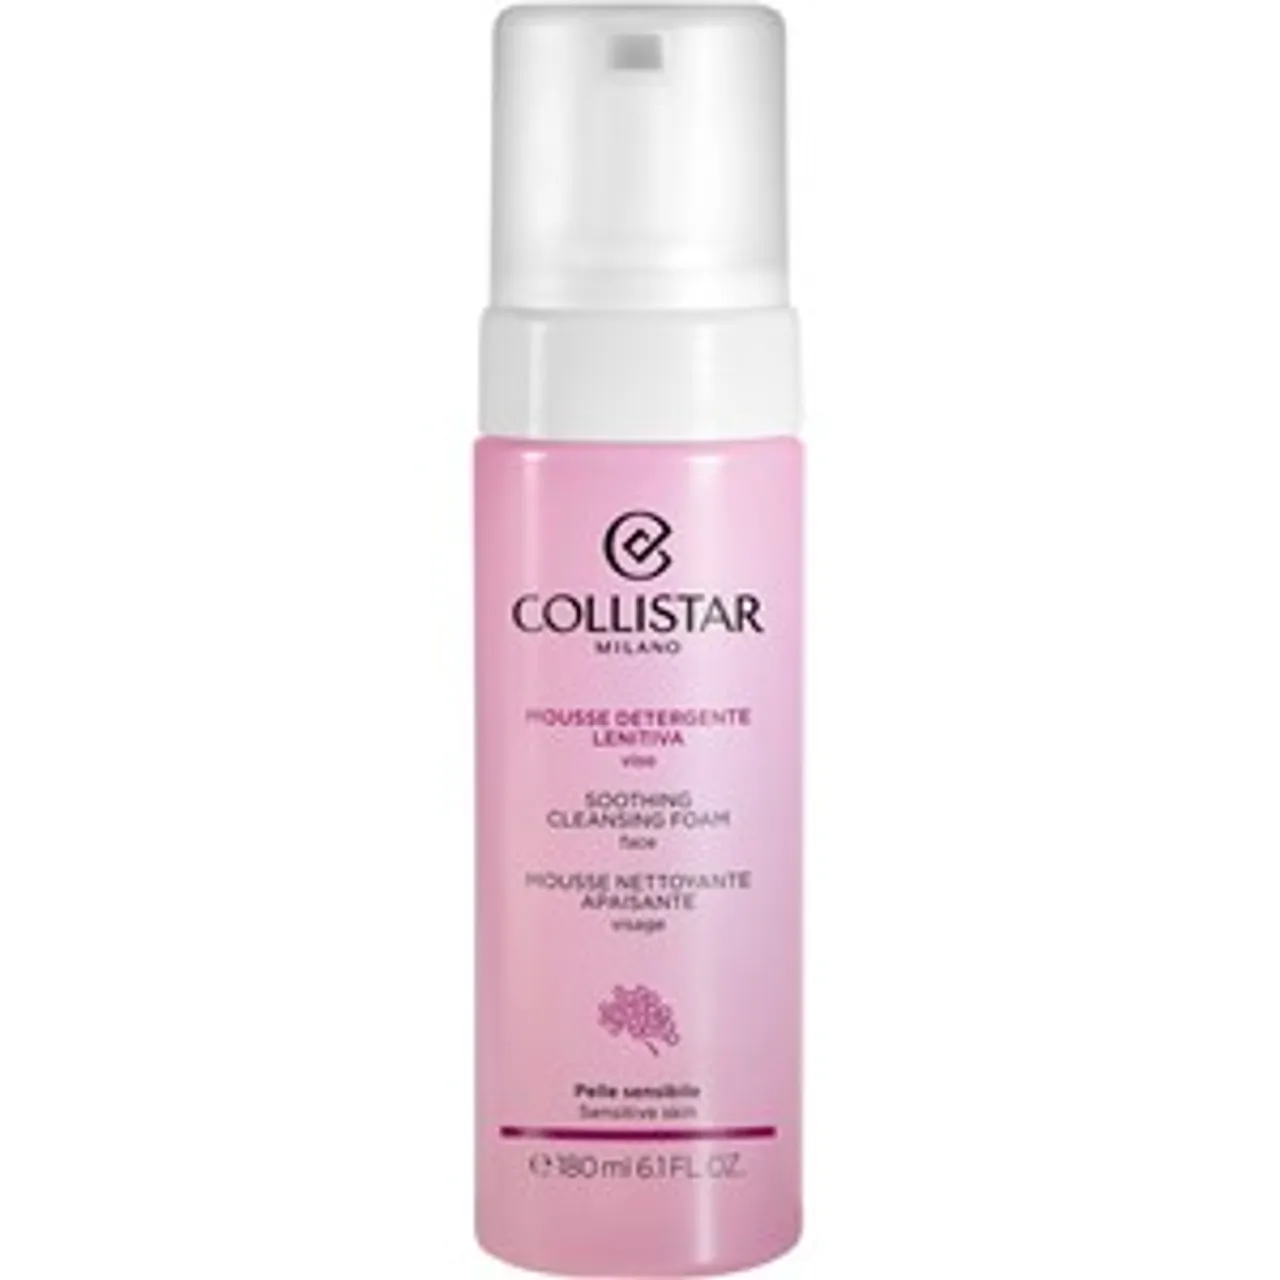 Collistar Soothing Cleansing Foam 2 180 ml